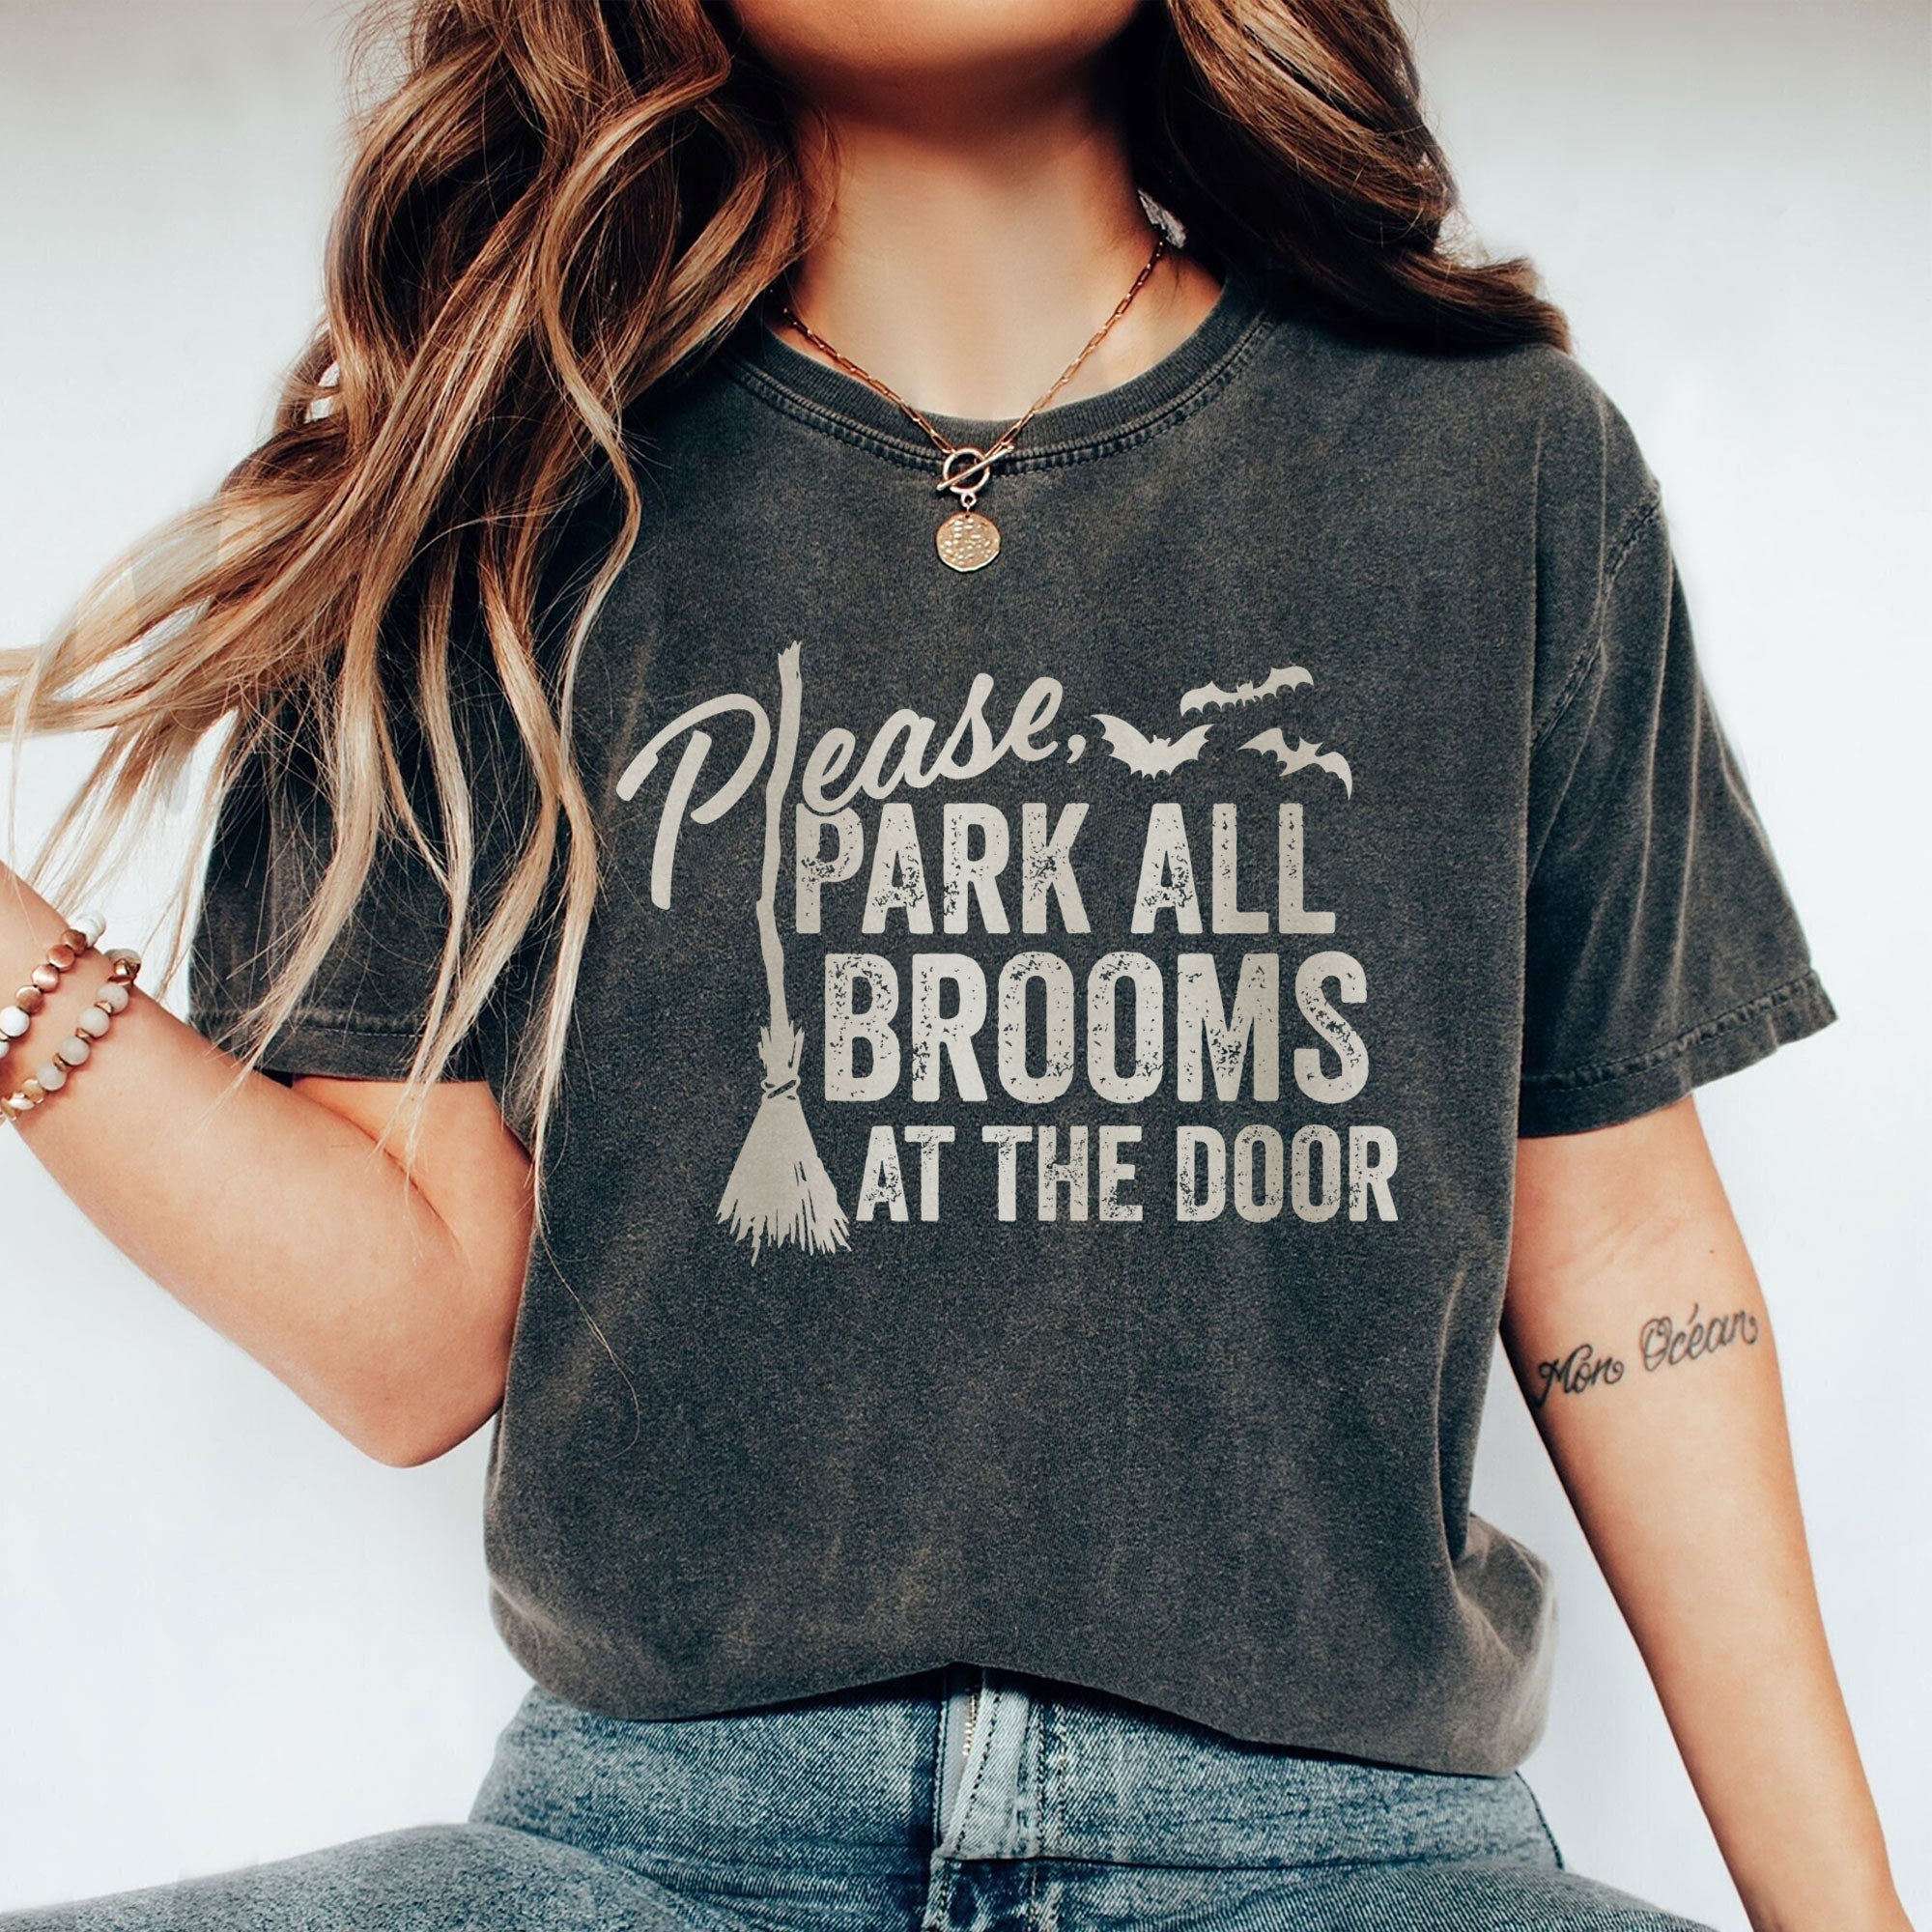 please park all brooms at the door oversized garment dyed shirt